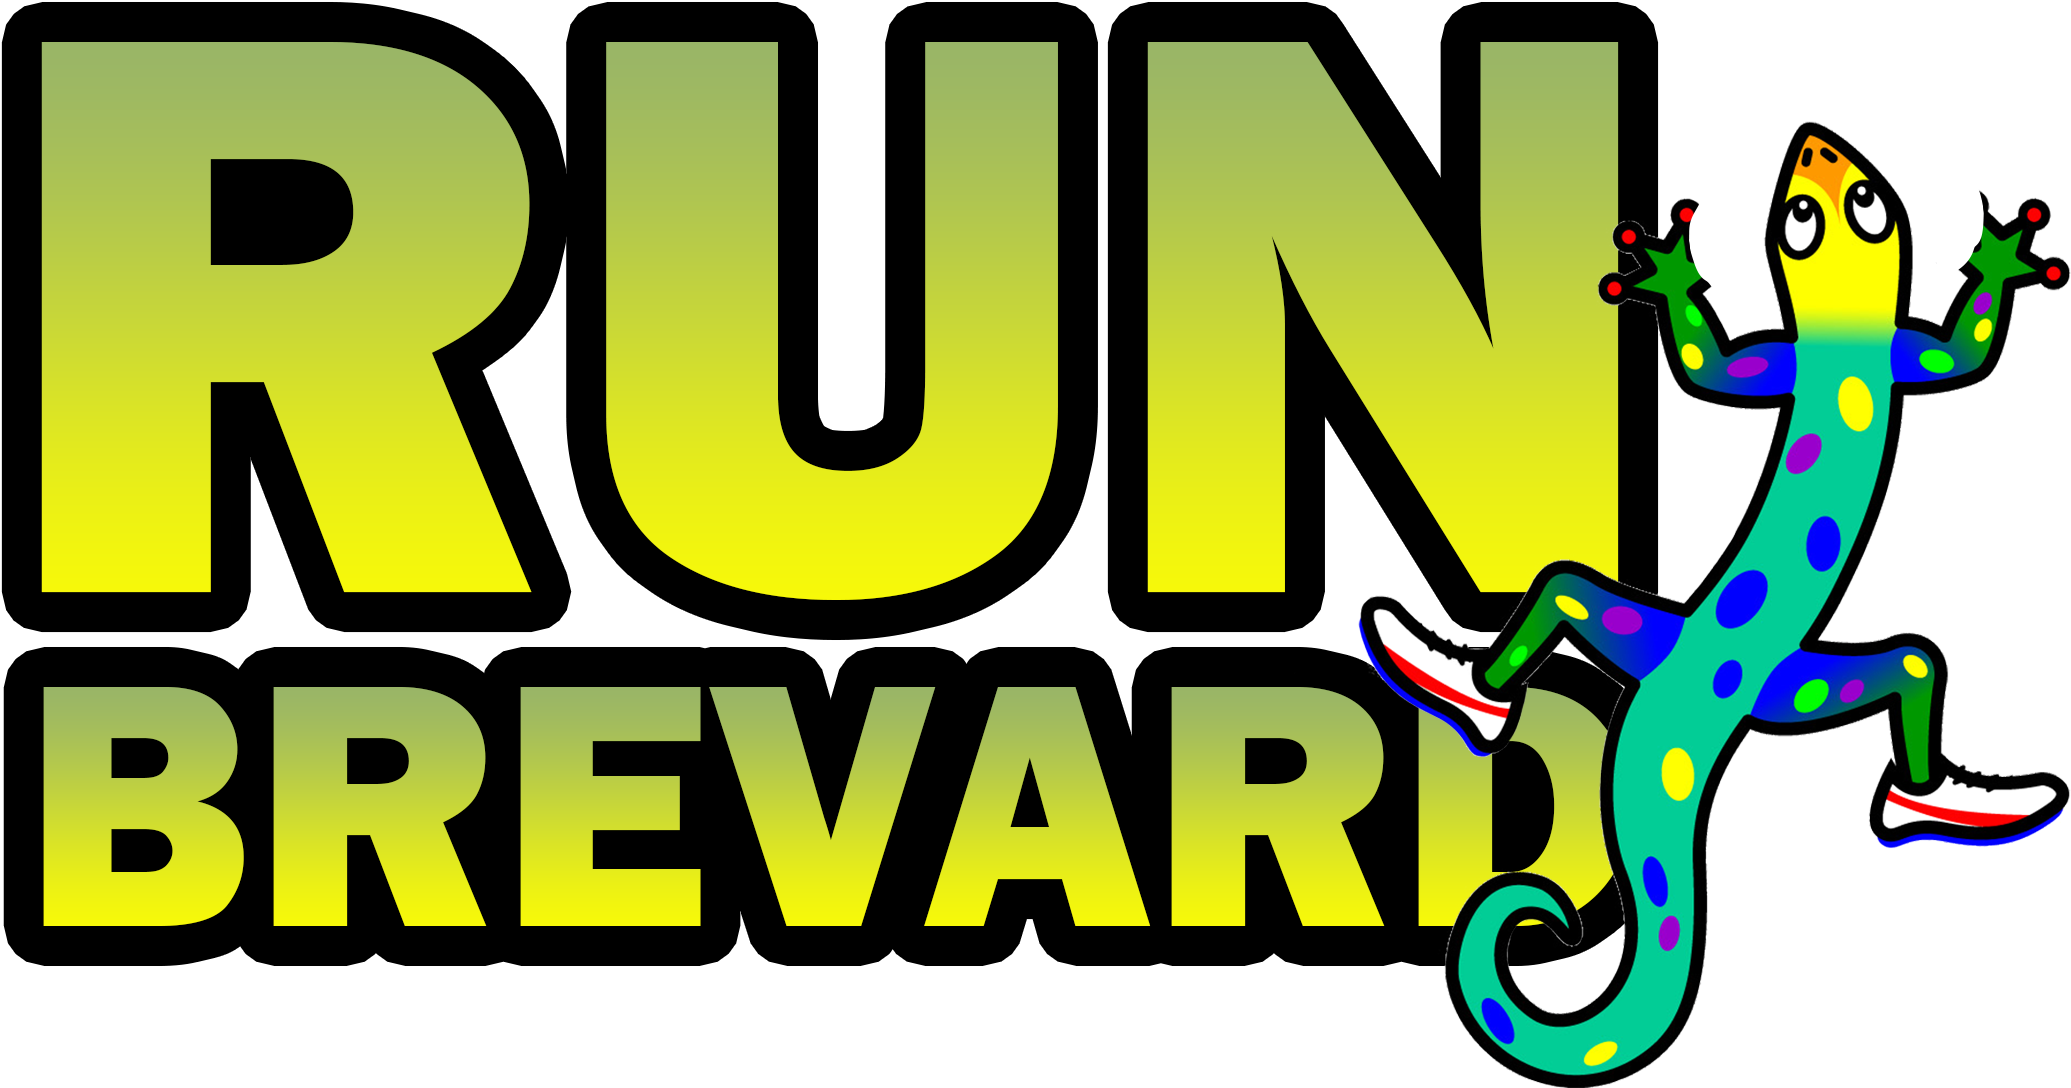 Welcome To The Run Brevard Podcast By Running Zone - Running Zone (2340x1308)